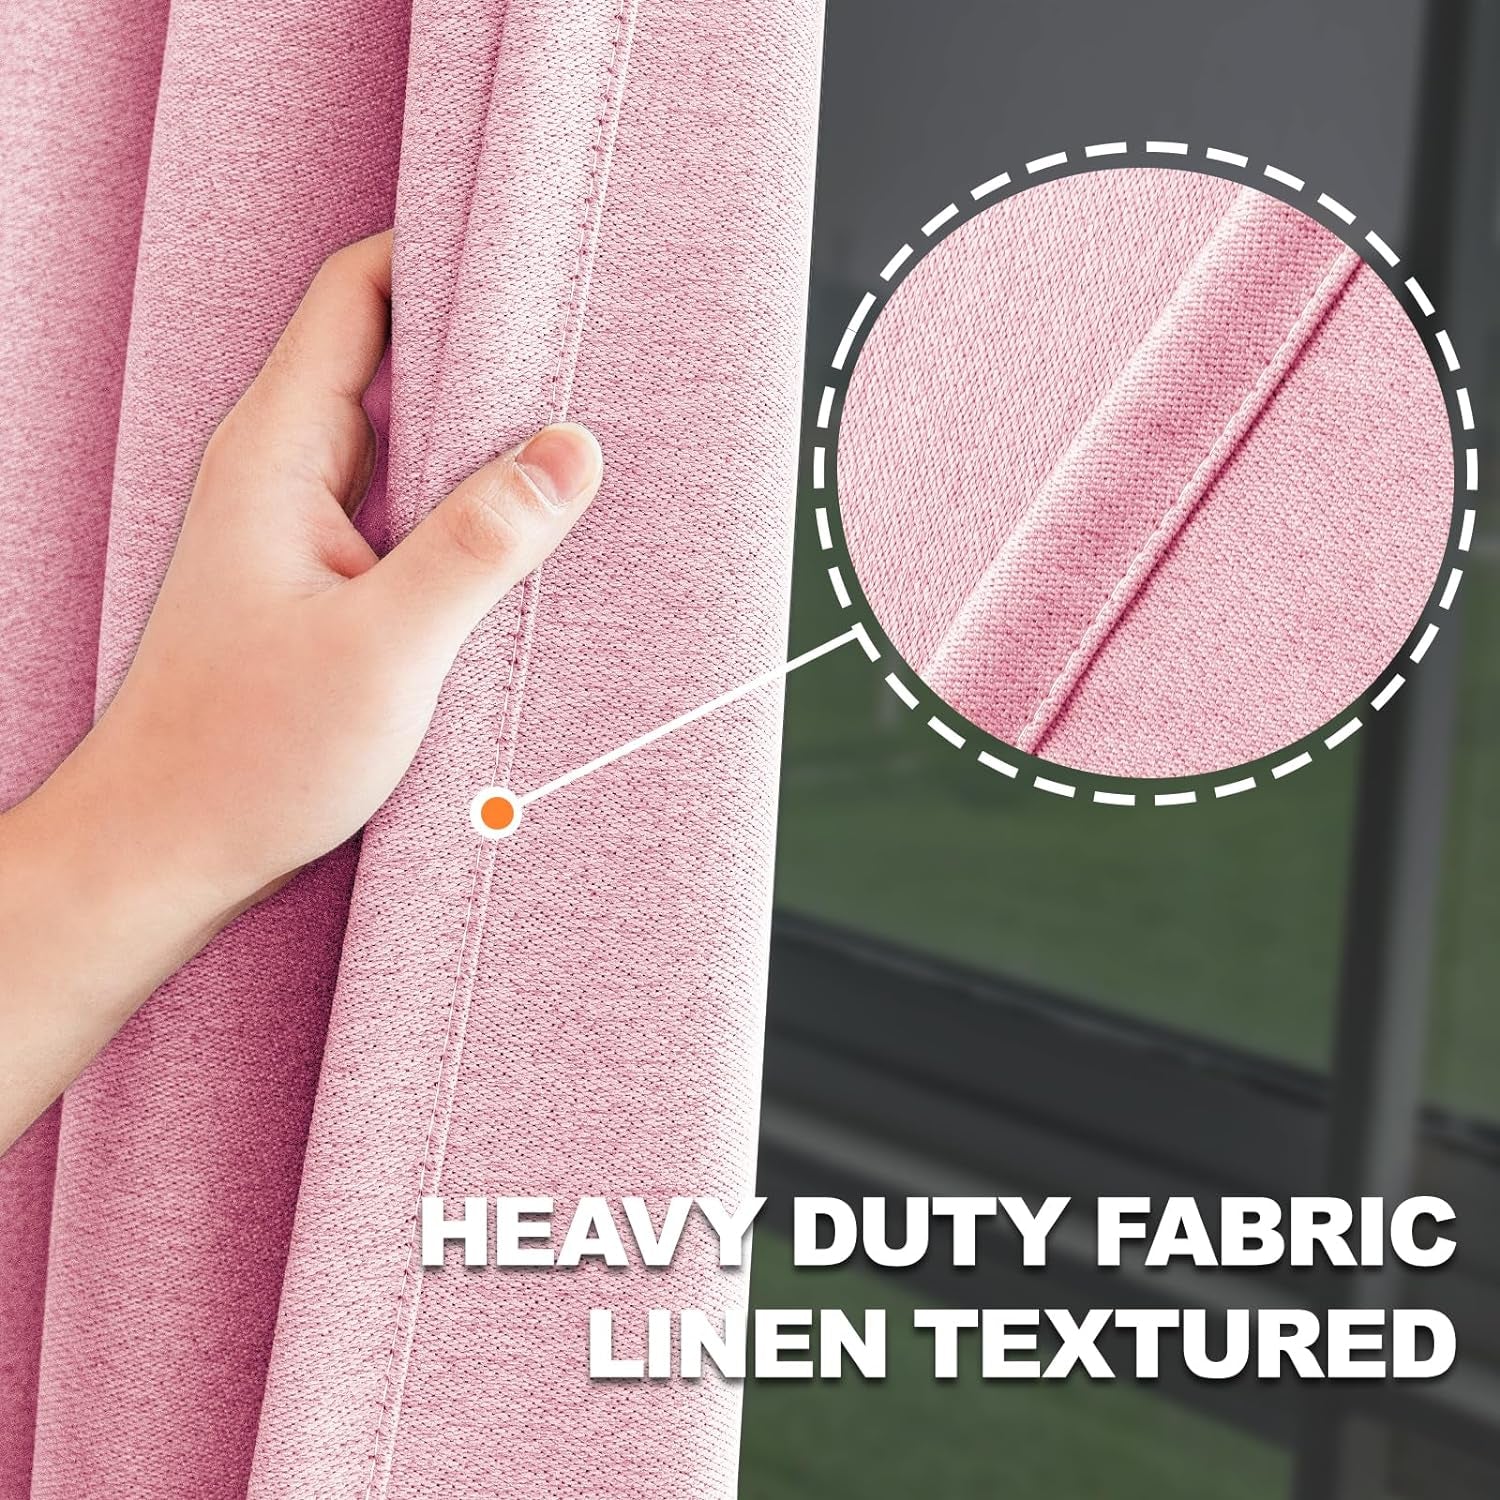 JIVINER Blackout Curtains 84 Inches Long Soundproof Thermal Insulated Curtains/Drapes/Panels for Kid'S Room (Baby Pink, W42 X L84,2 Panels)  JWN E-Commerce   